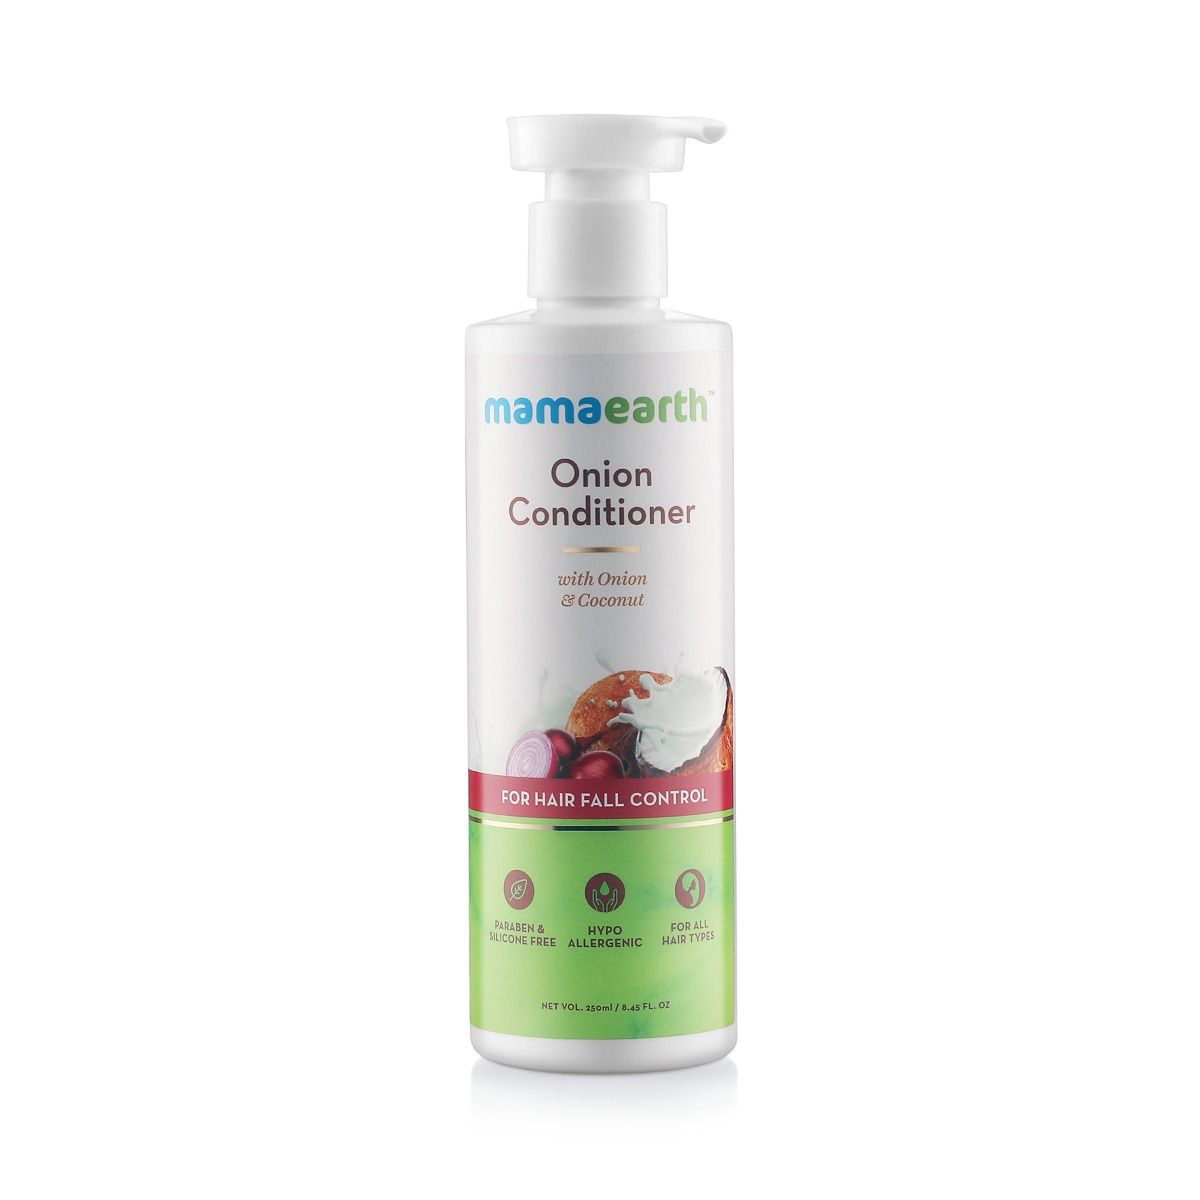 Mamaearth Onion Conditioner With Onion and Coconut, 250 ml Price, Uses,  Side Effects, Composition - Apollo Pharmacy